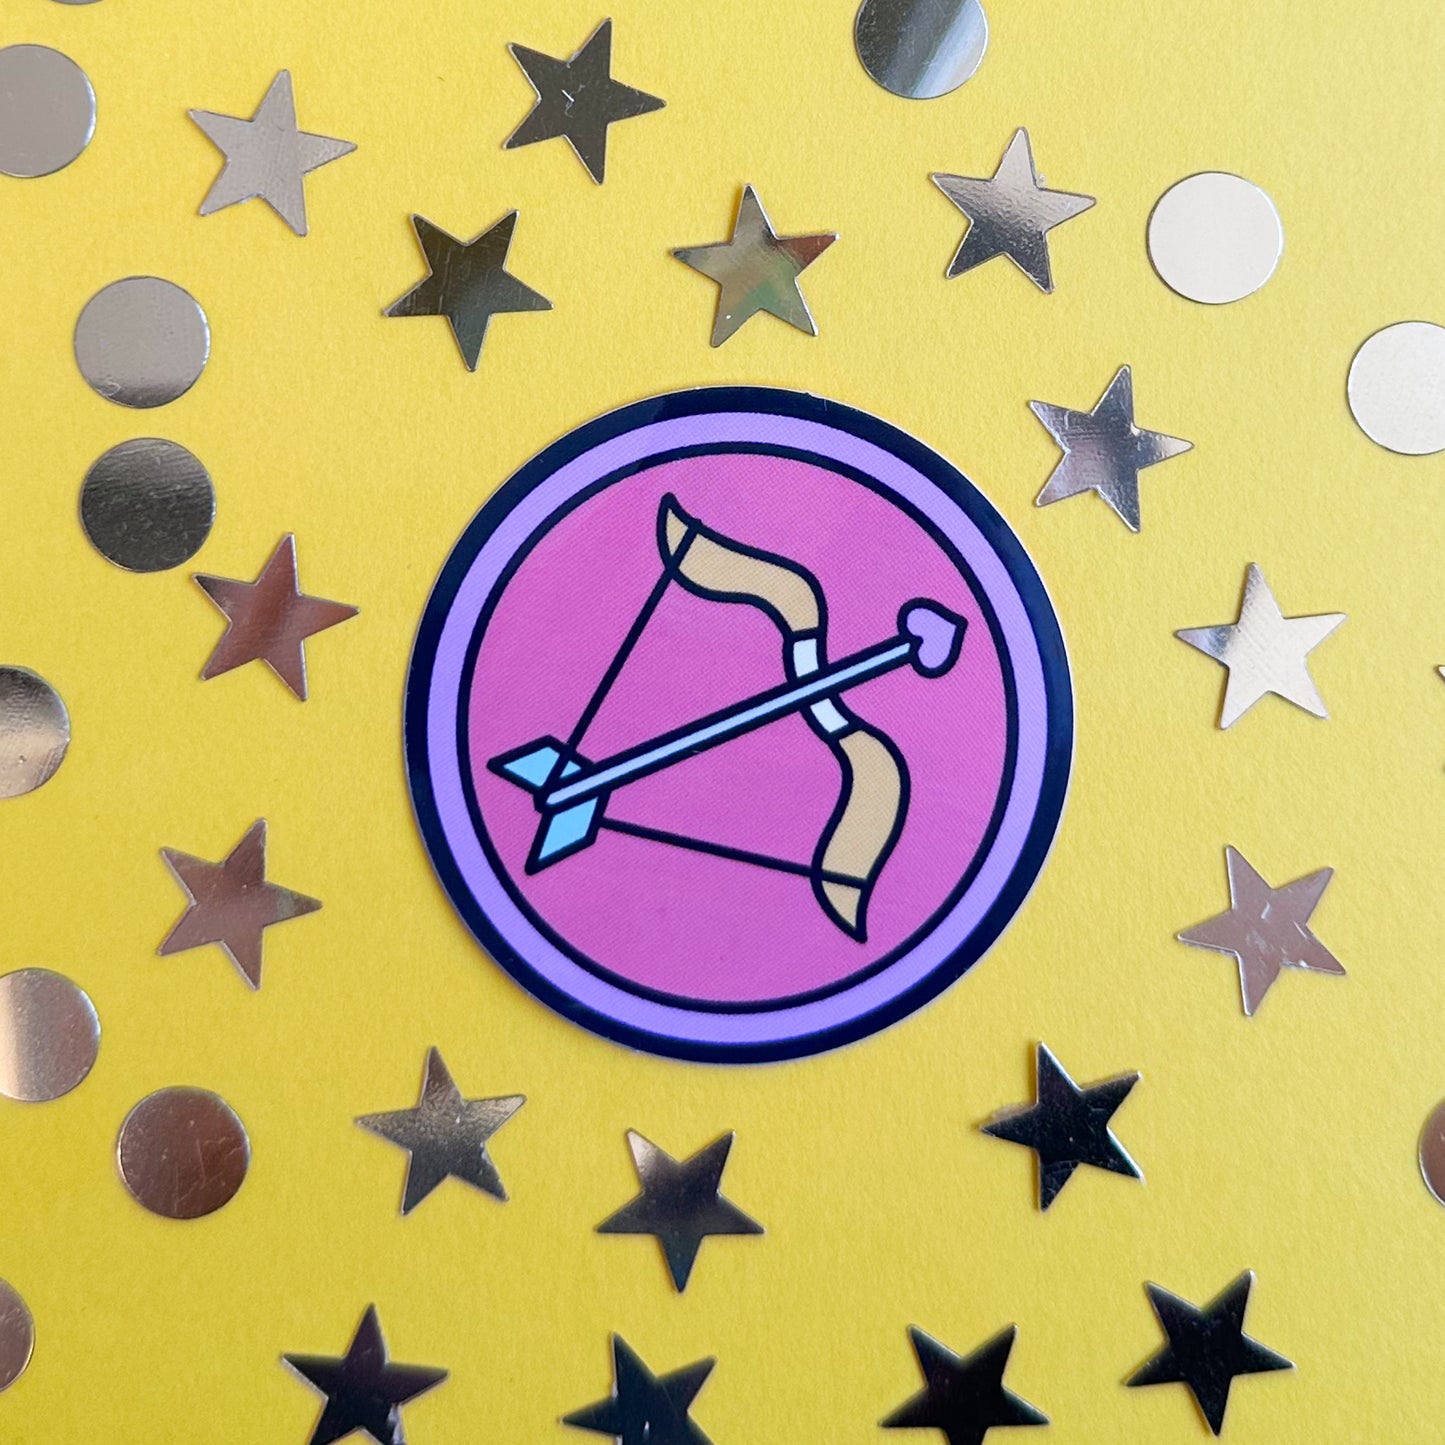 A circle sticker with a cute version of the symbol for Sagittarius in it. The sticker is on a yellow paper background with gold confetti around it. 